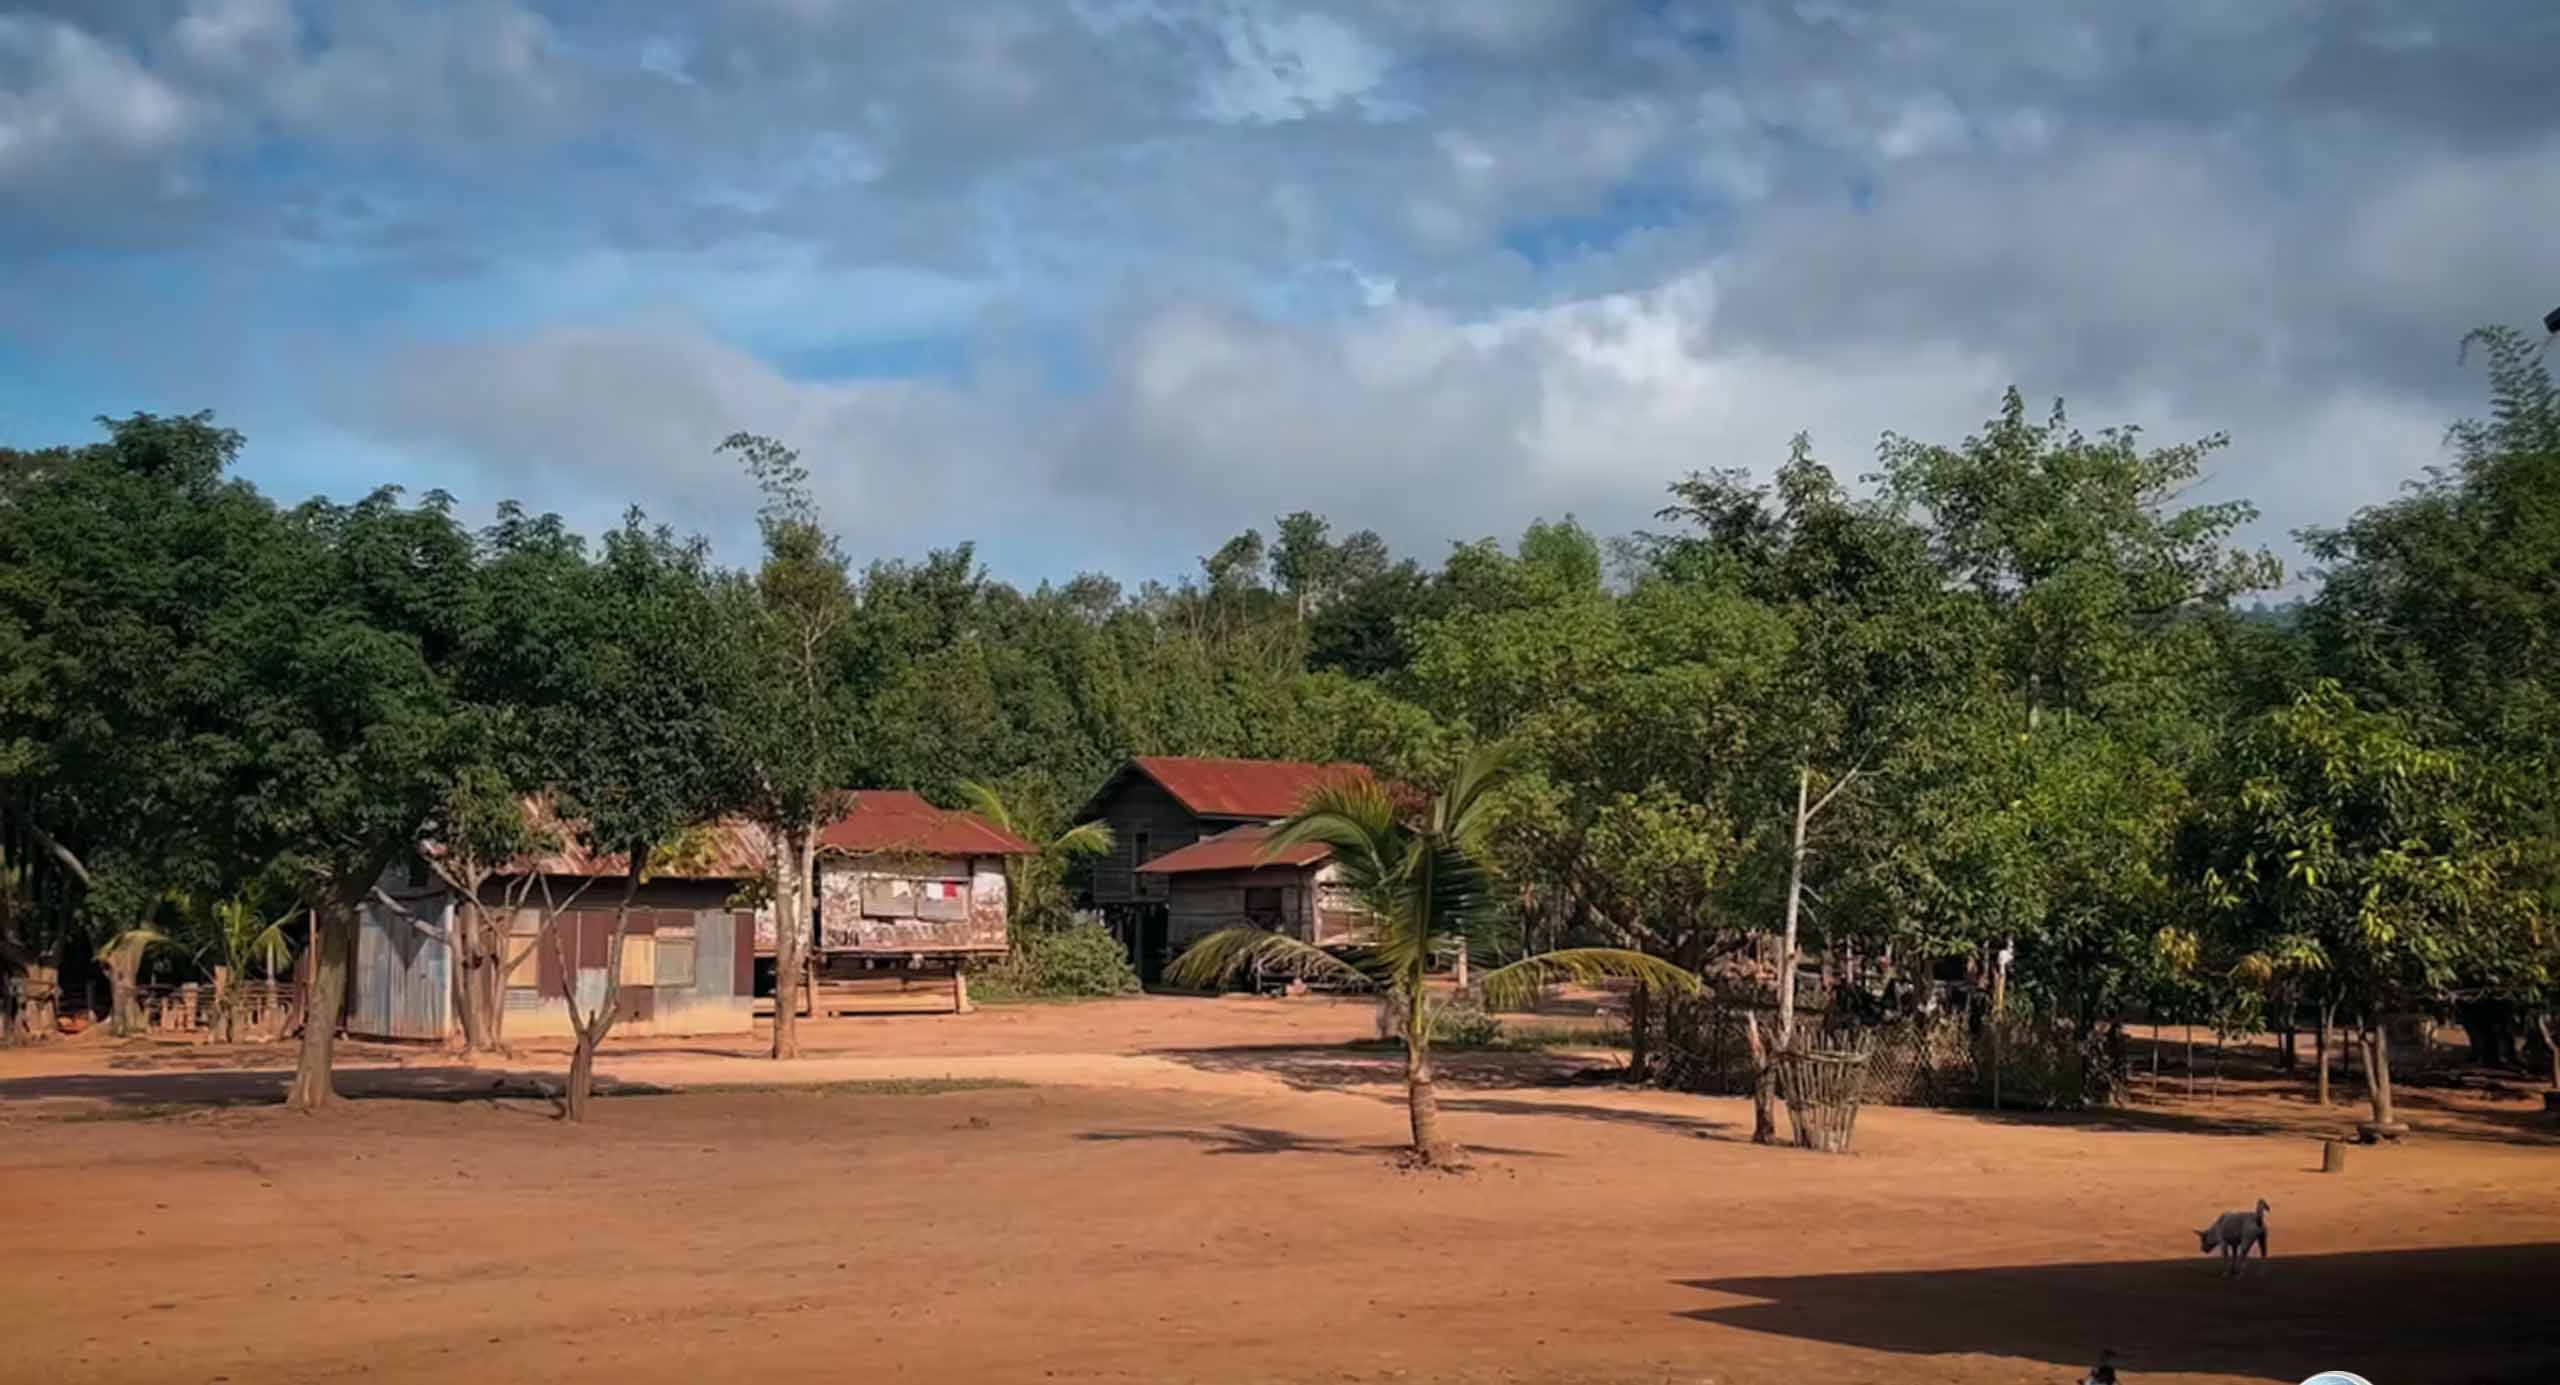 Losing a Home and Job for Following Christ in Laos